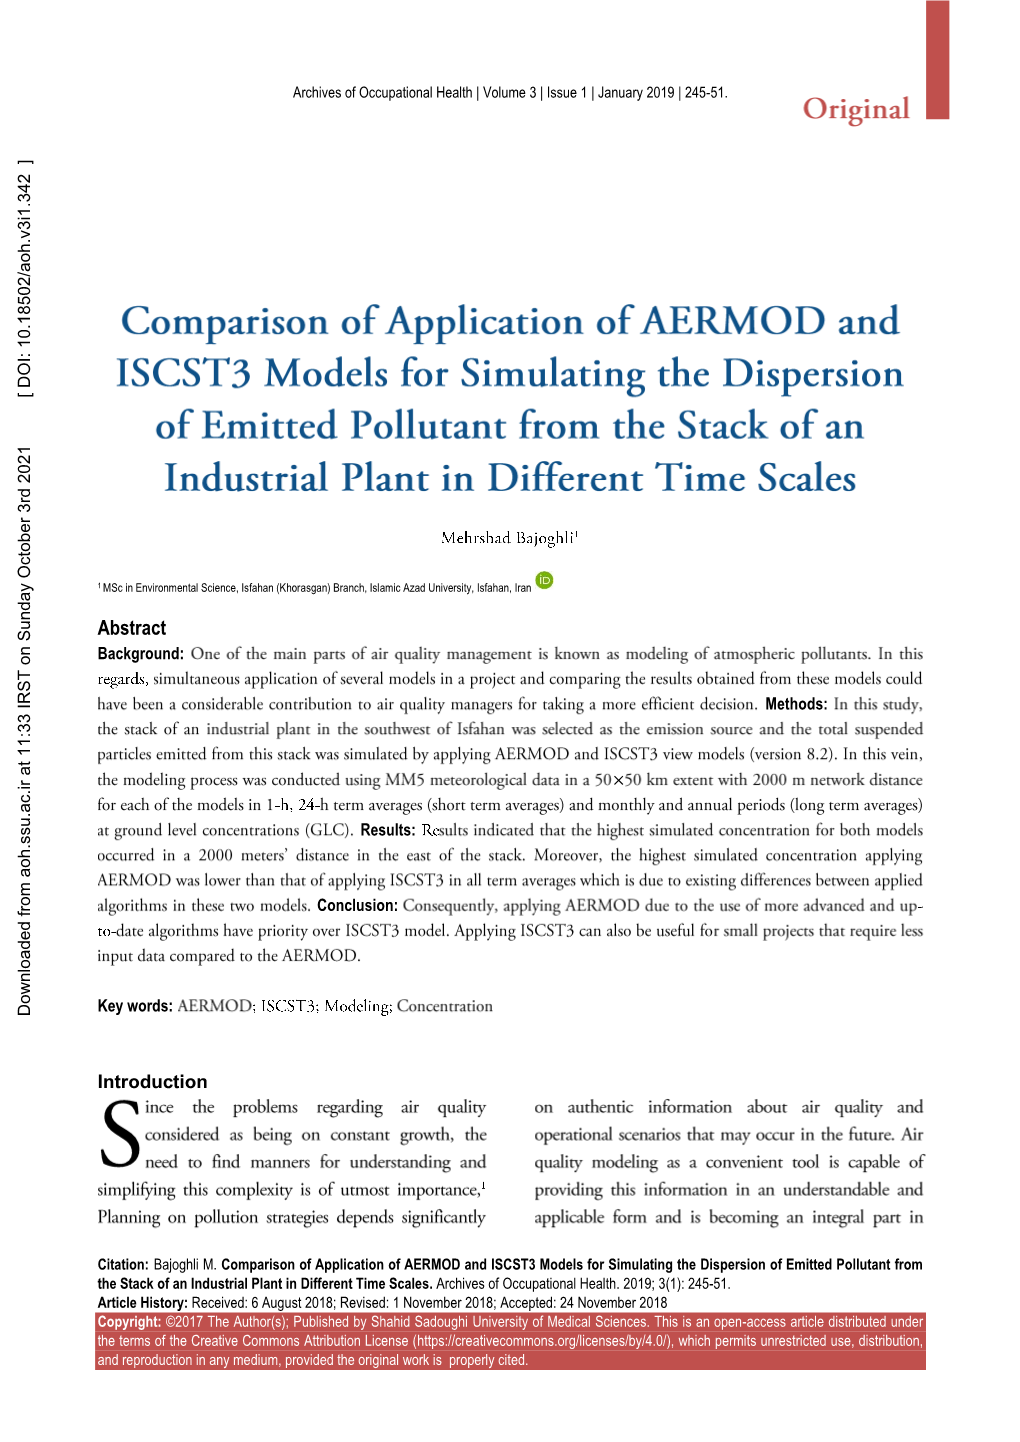 Comparison of Application of AERMOD and ISCST3 Models For